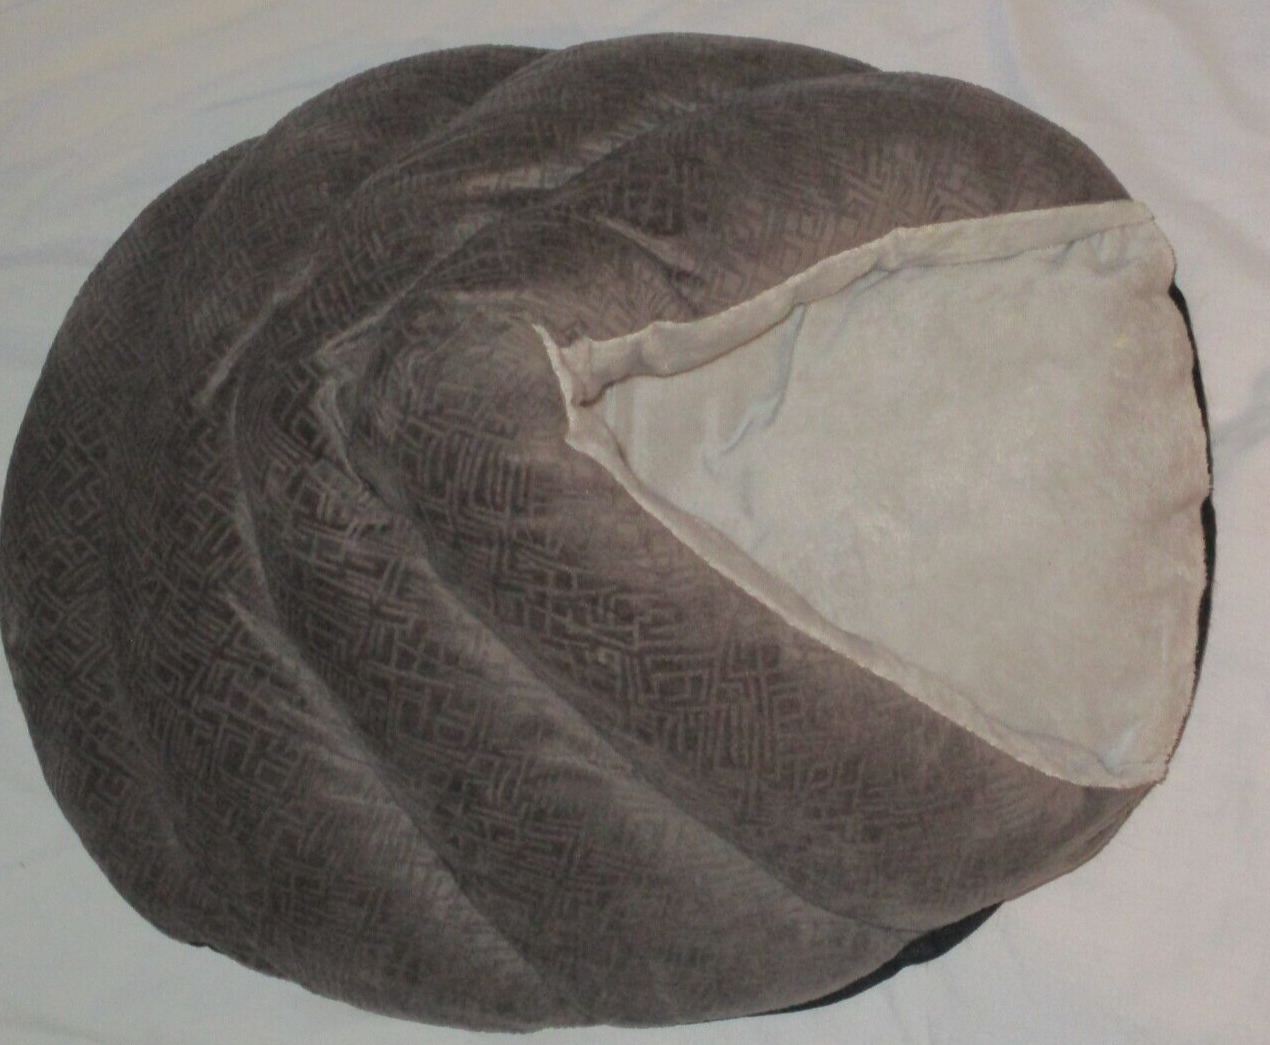 SPOT Cuddle Cave Cat Small Dog Bed Super Soft Cocoon 22 x 17 x 10 Gray Washable